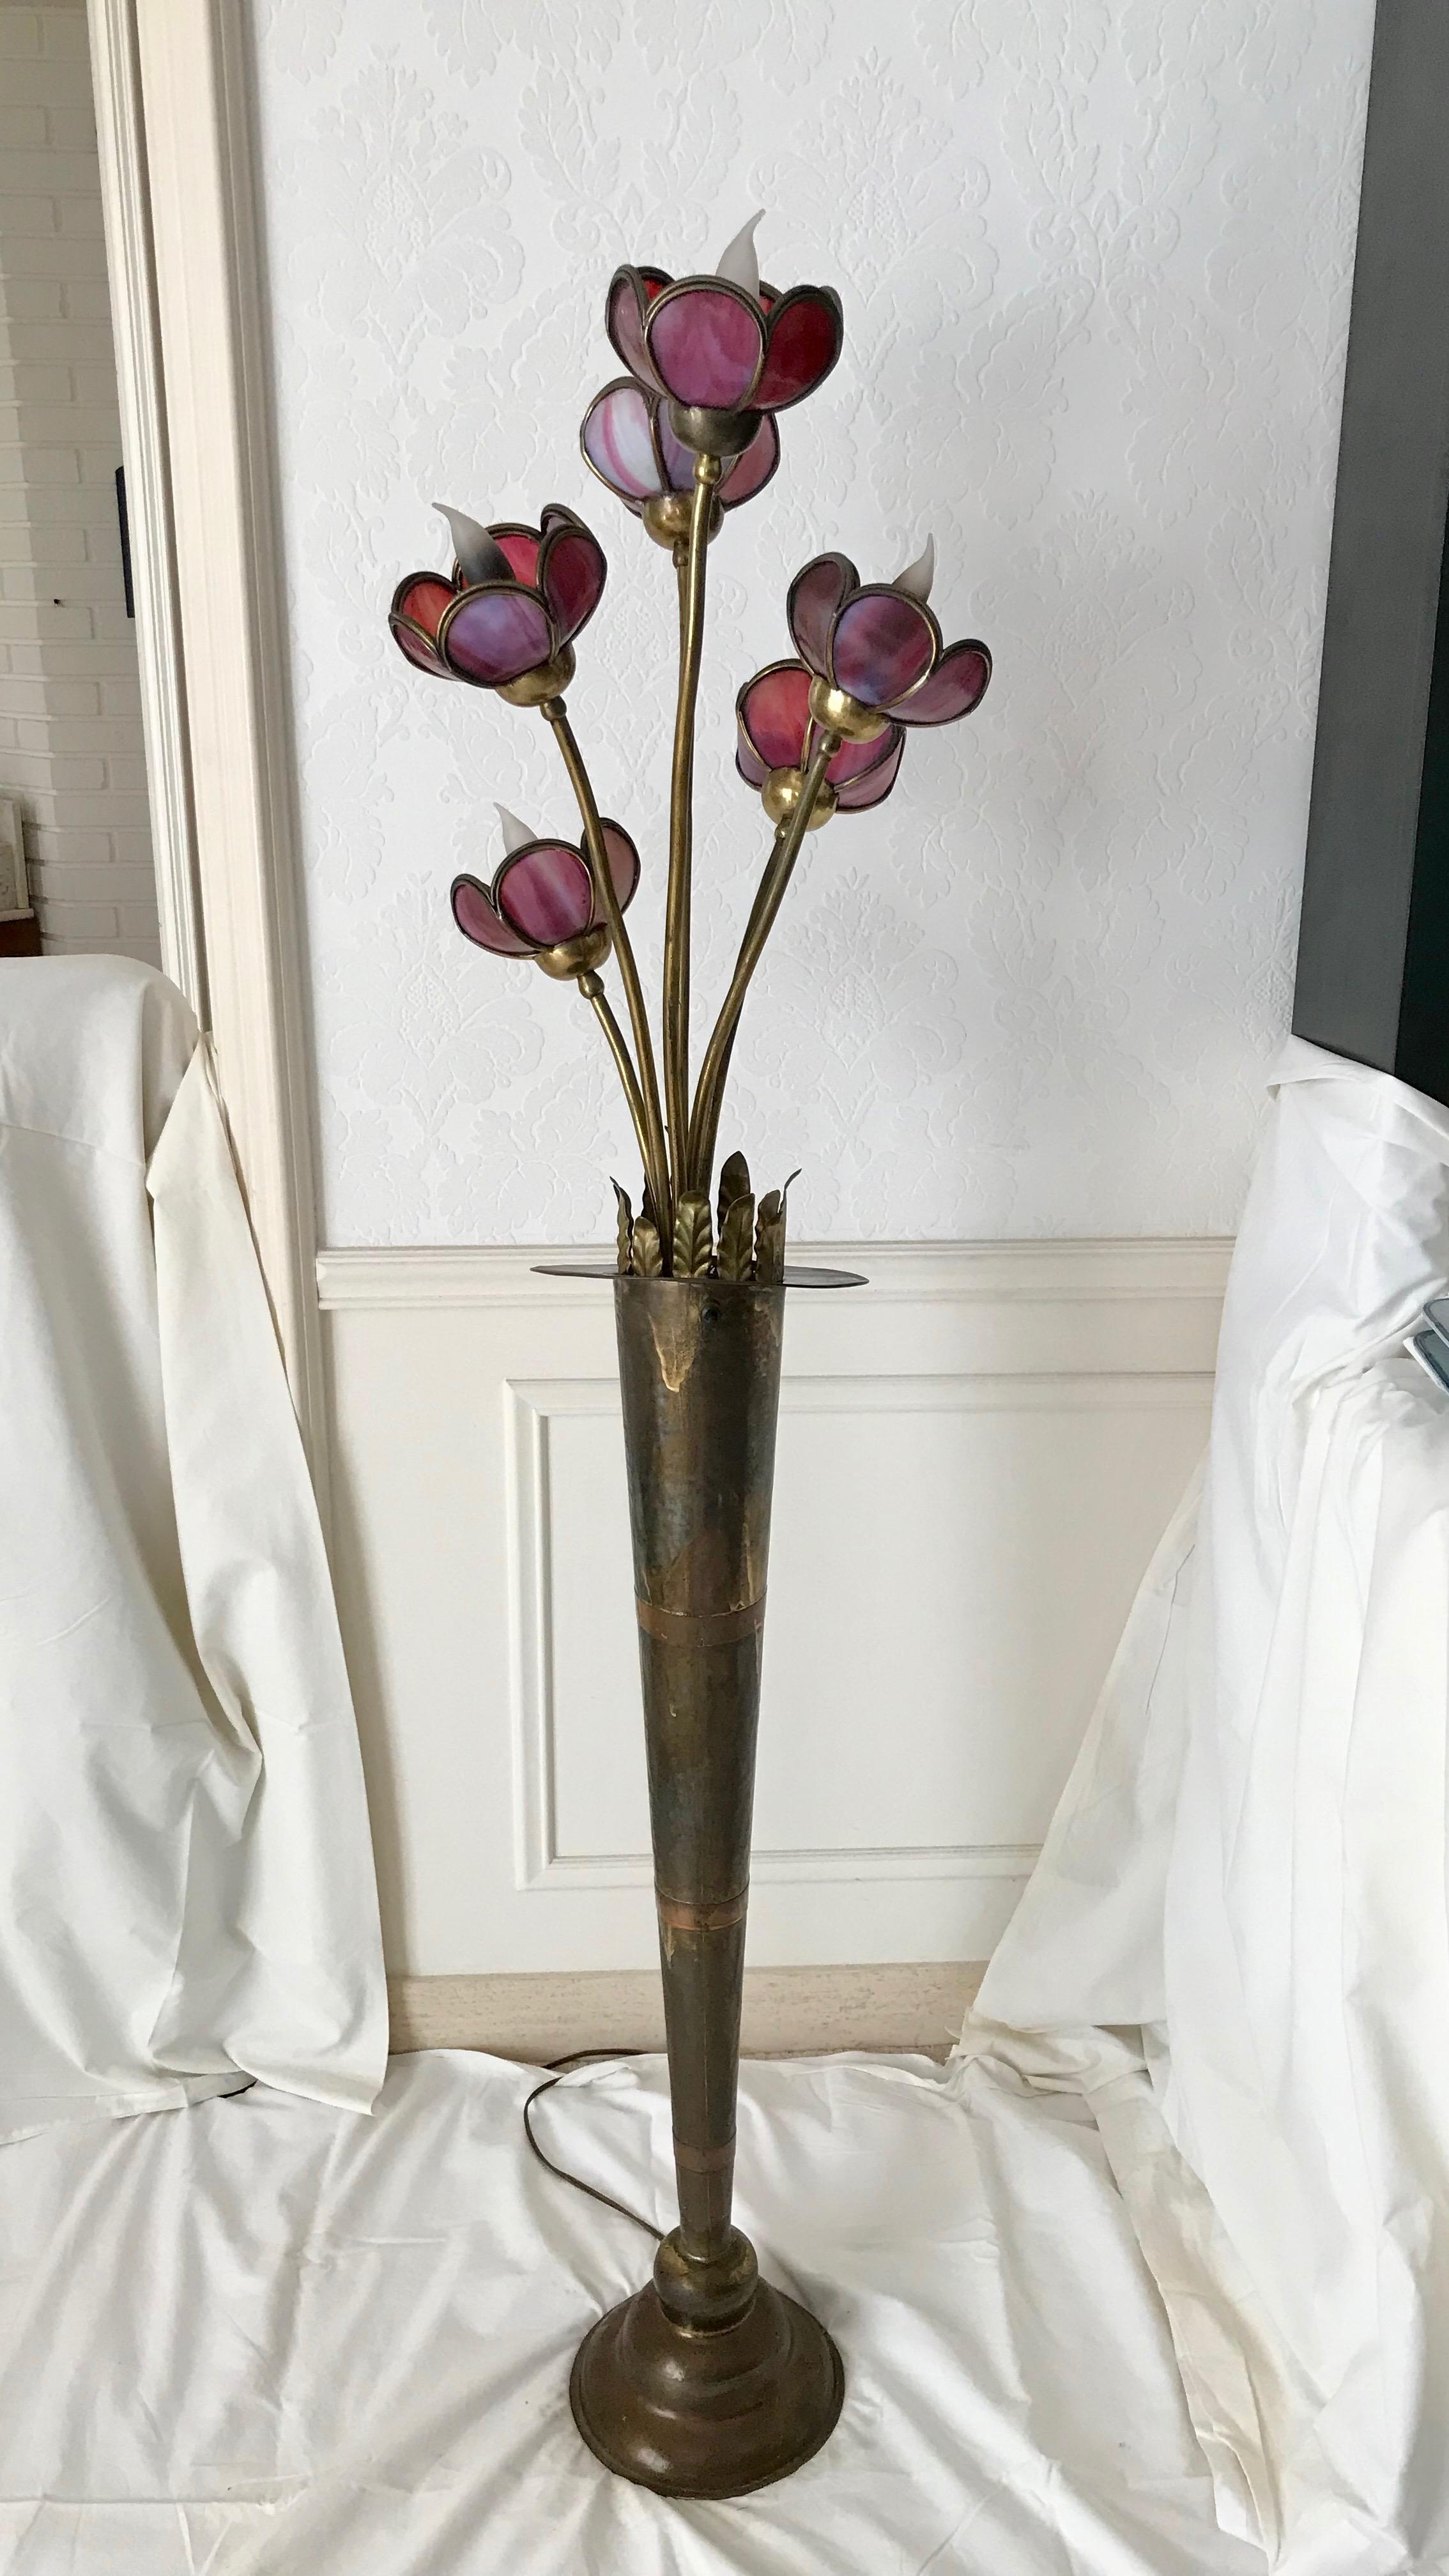 Fancifully designed with thin hammered sheet brass or metal.
Floor vase from which 5 variated 